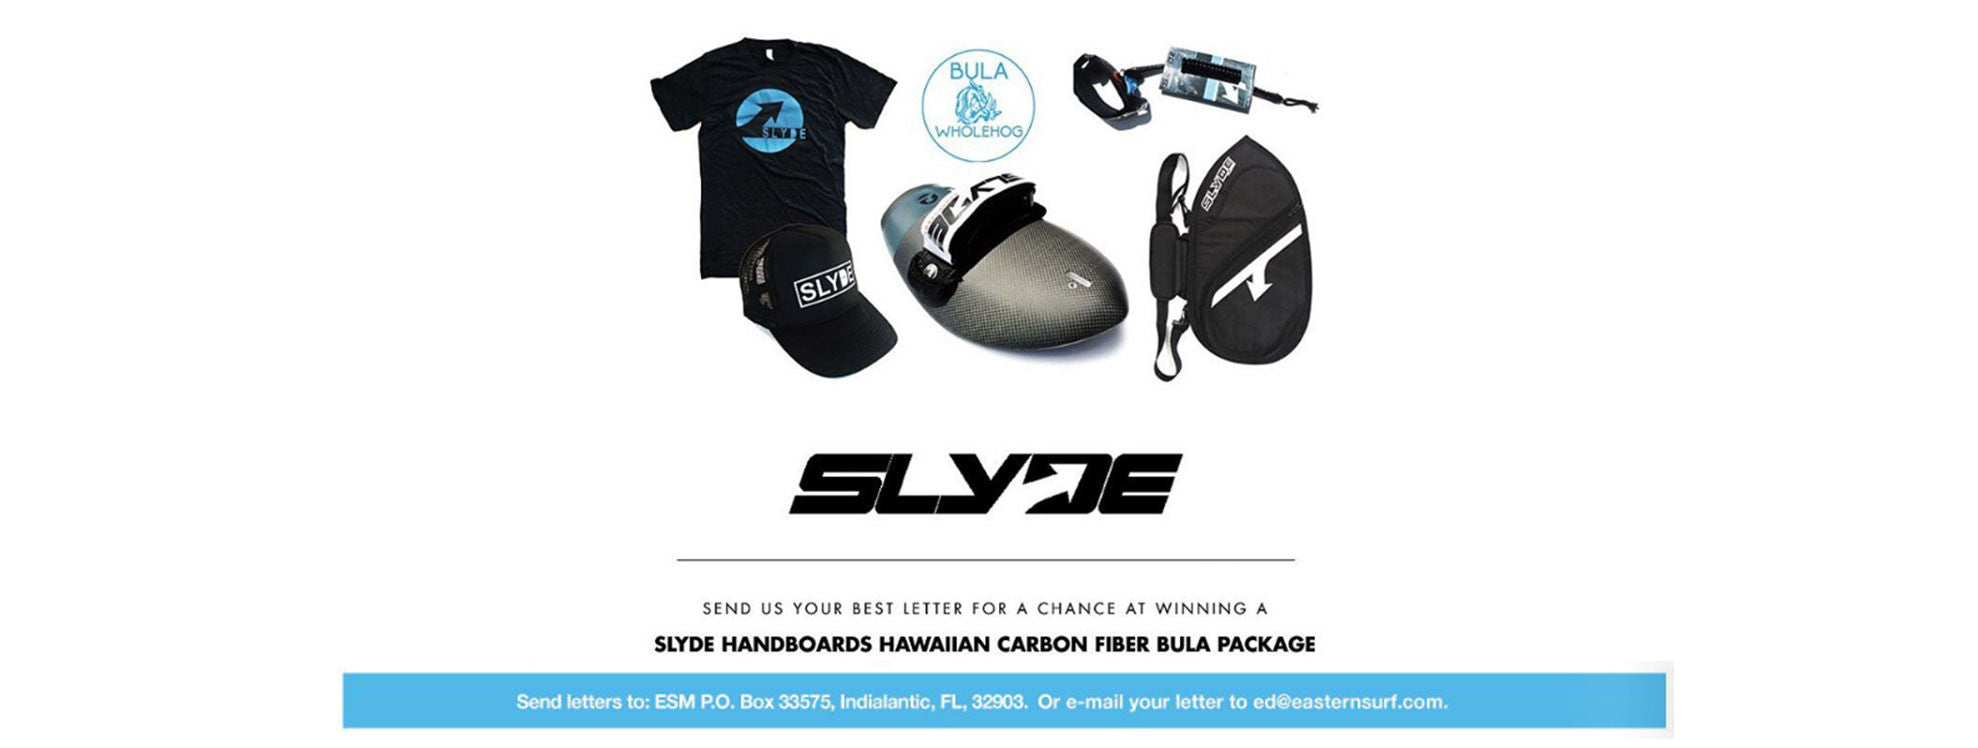 Eastern Surf Magazine Wants You To Win An Epic Slyde Prize Pack!